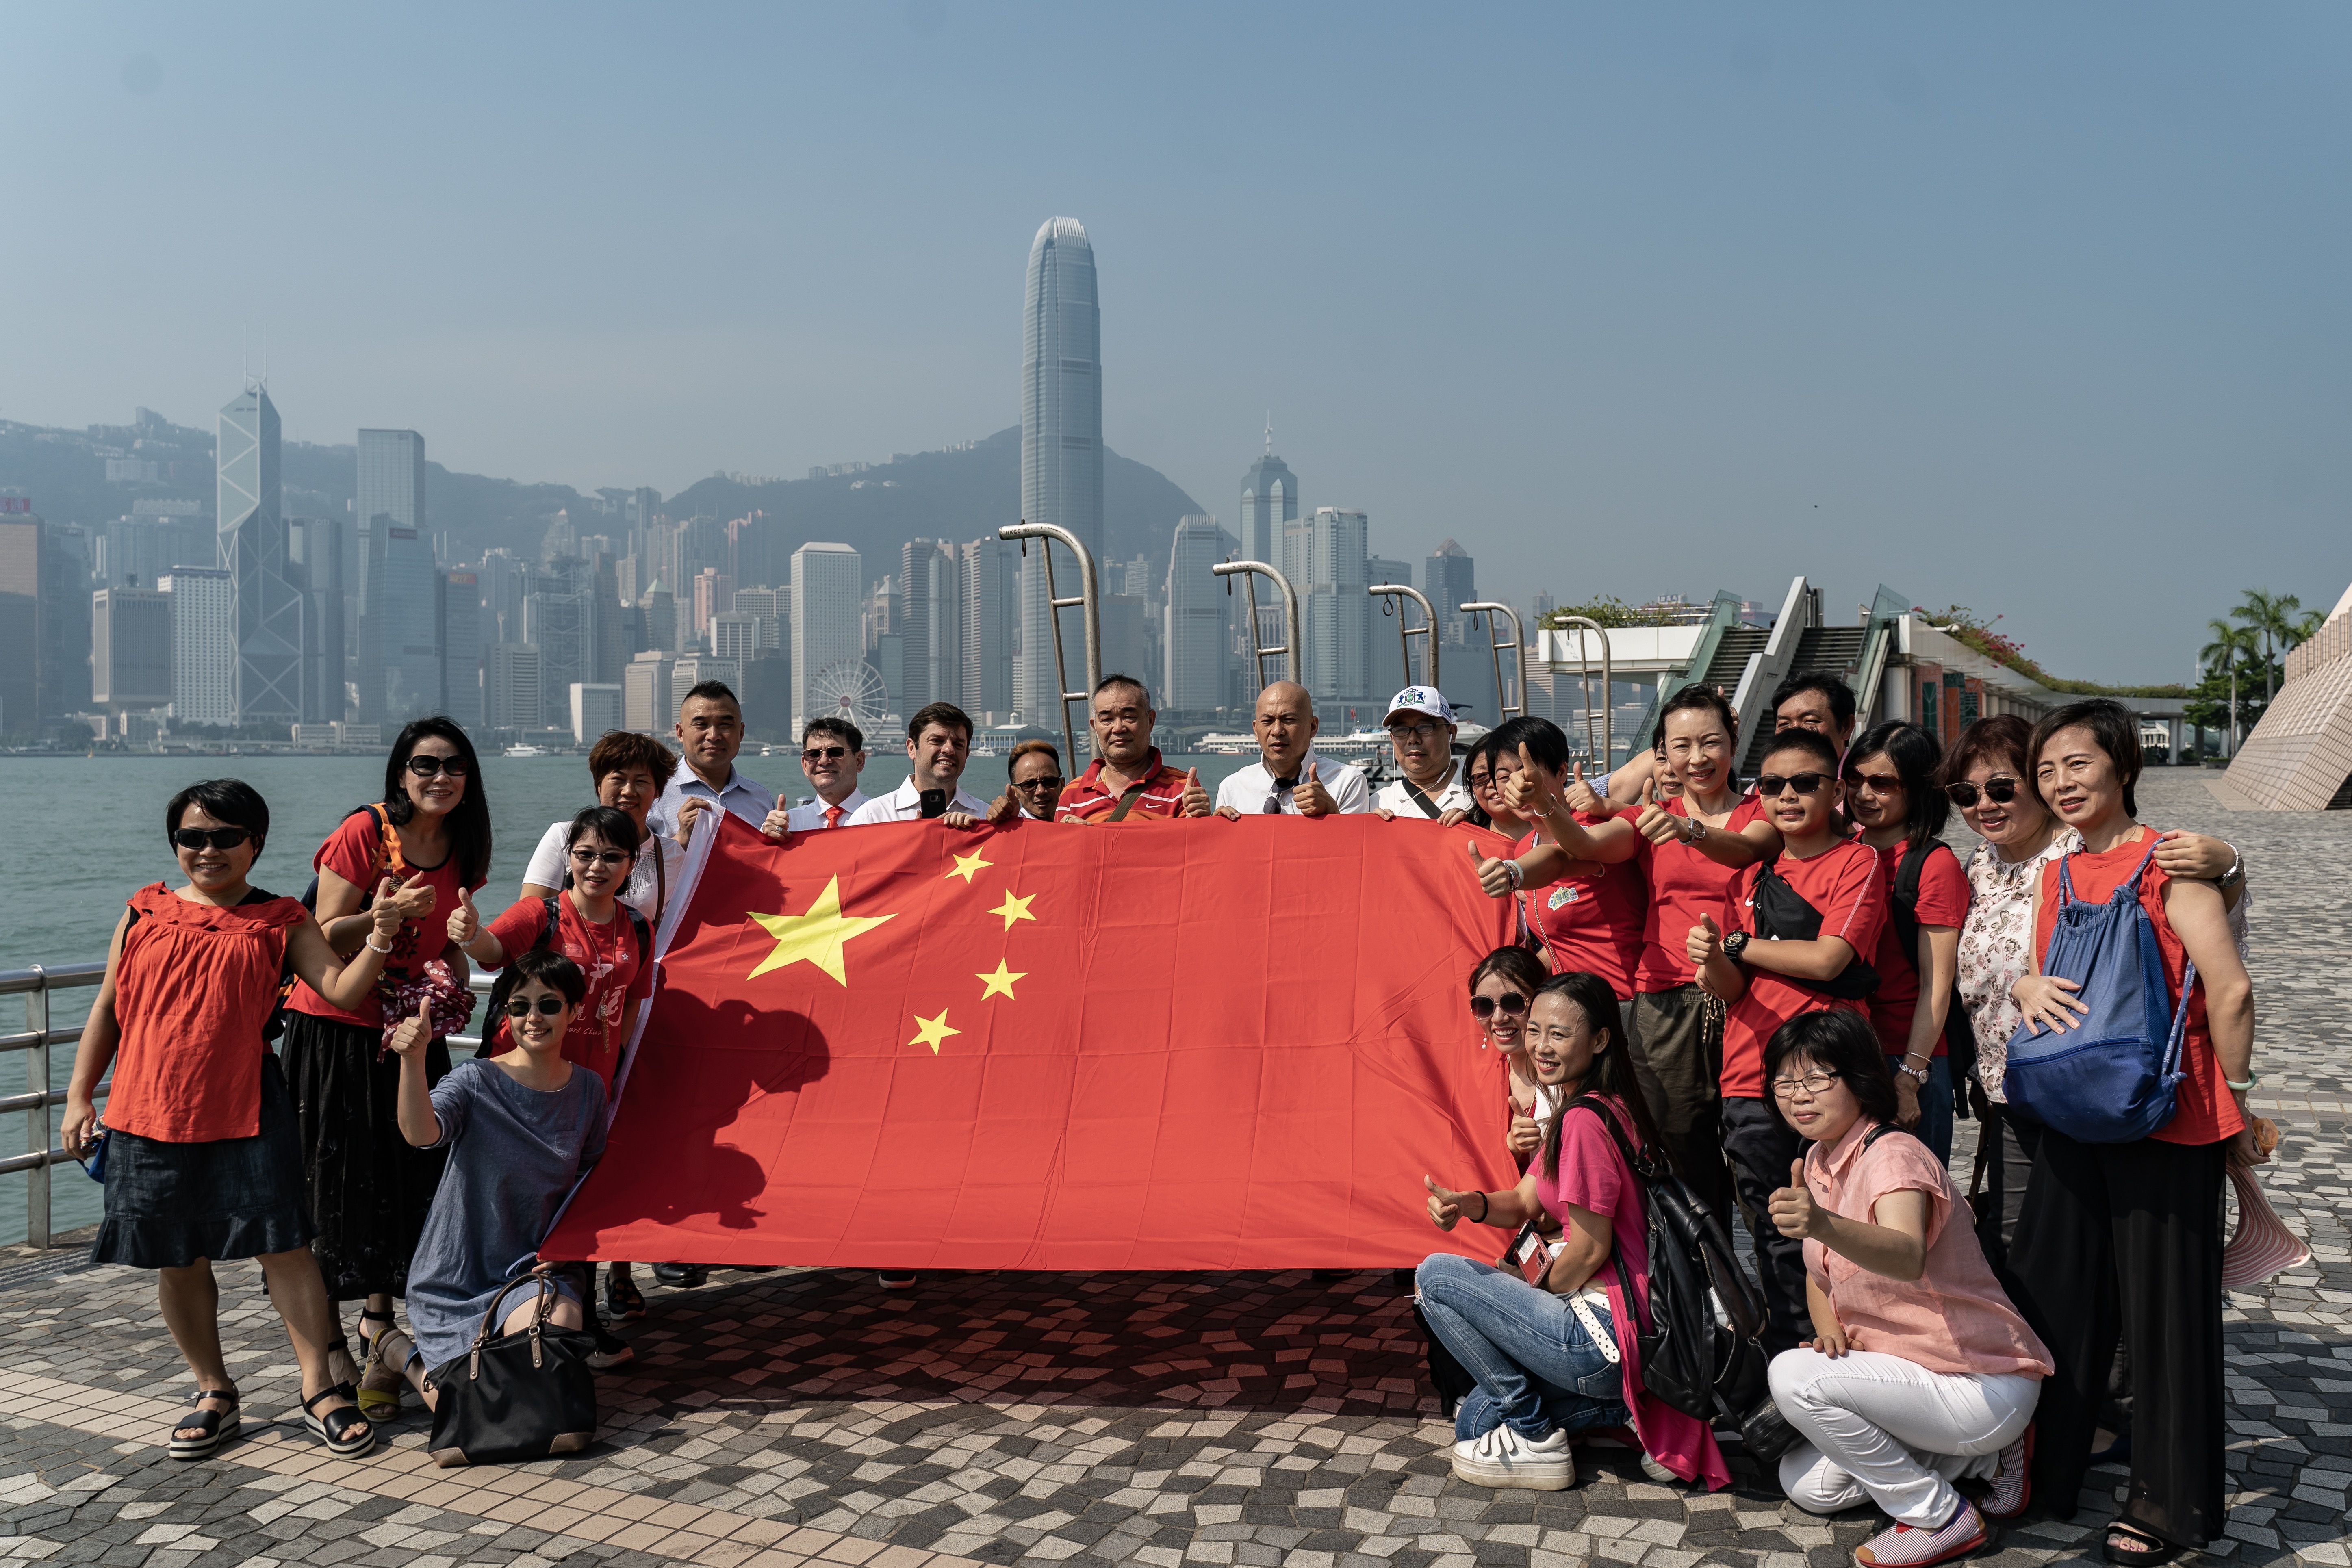 : Pro-China supporters wave Chinese flags during a rally at Hong Kong Cultural Centre on September 29, 2019 in Hong Kong